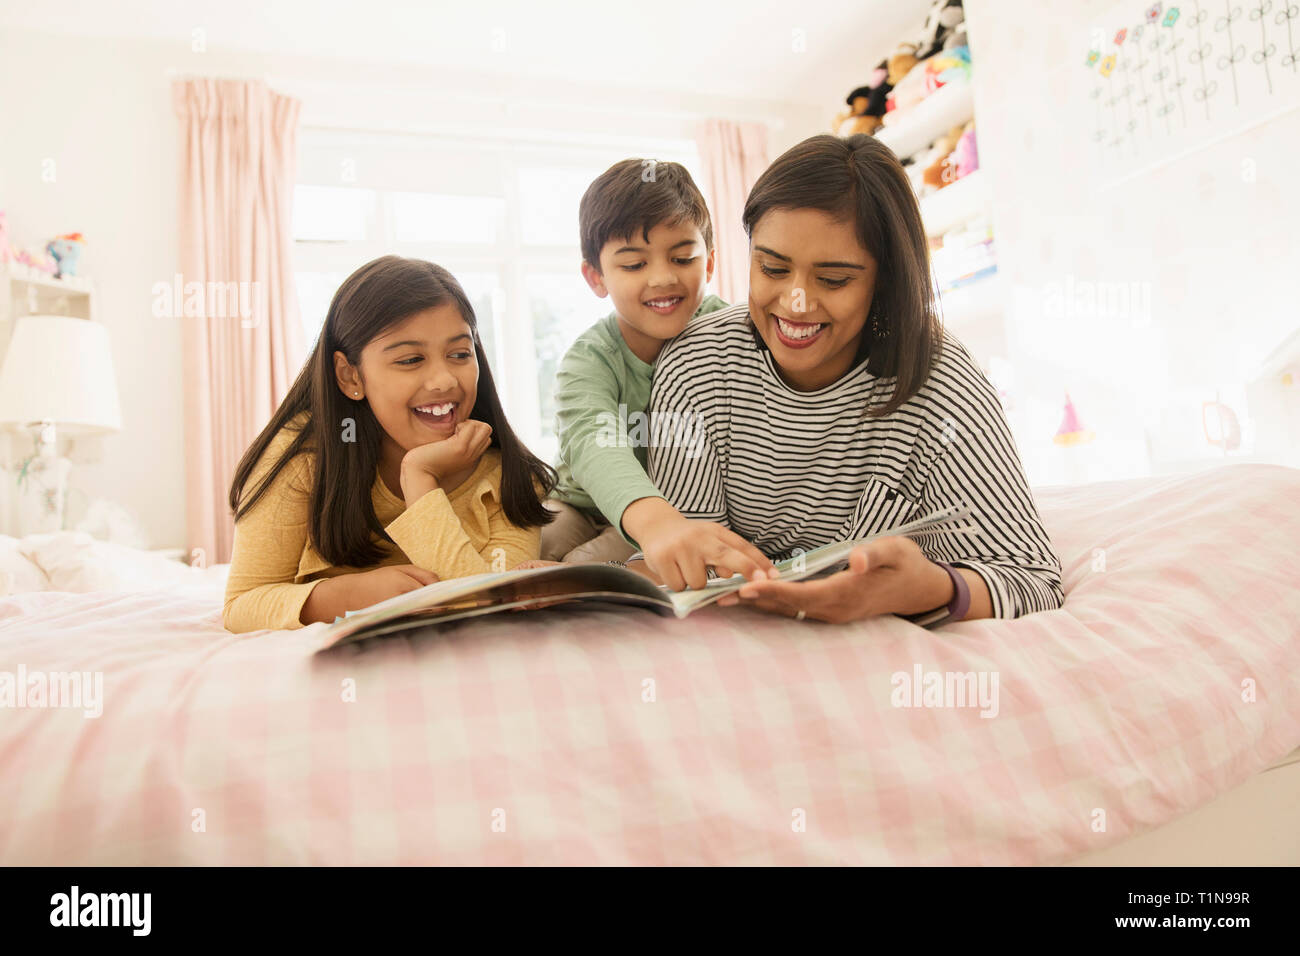 Mother reading book to children on bed Stock Photo